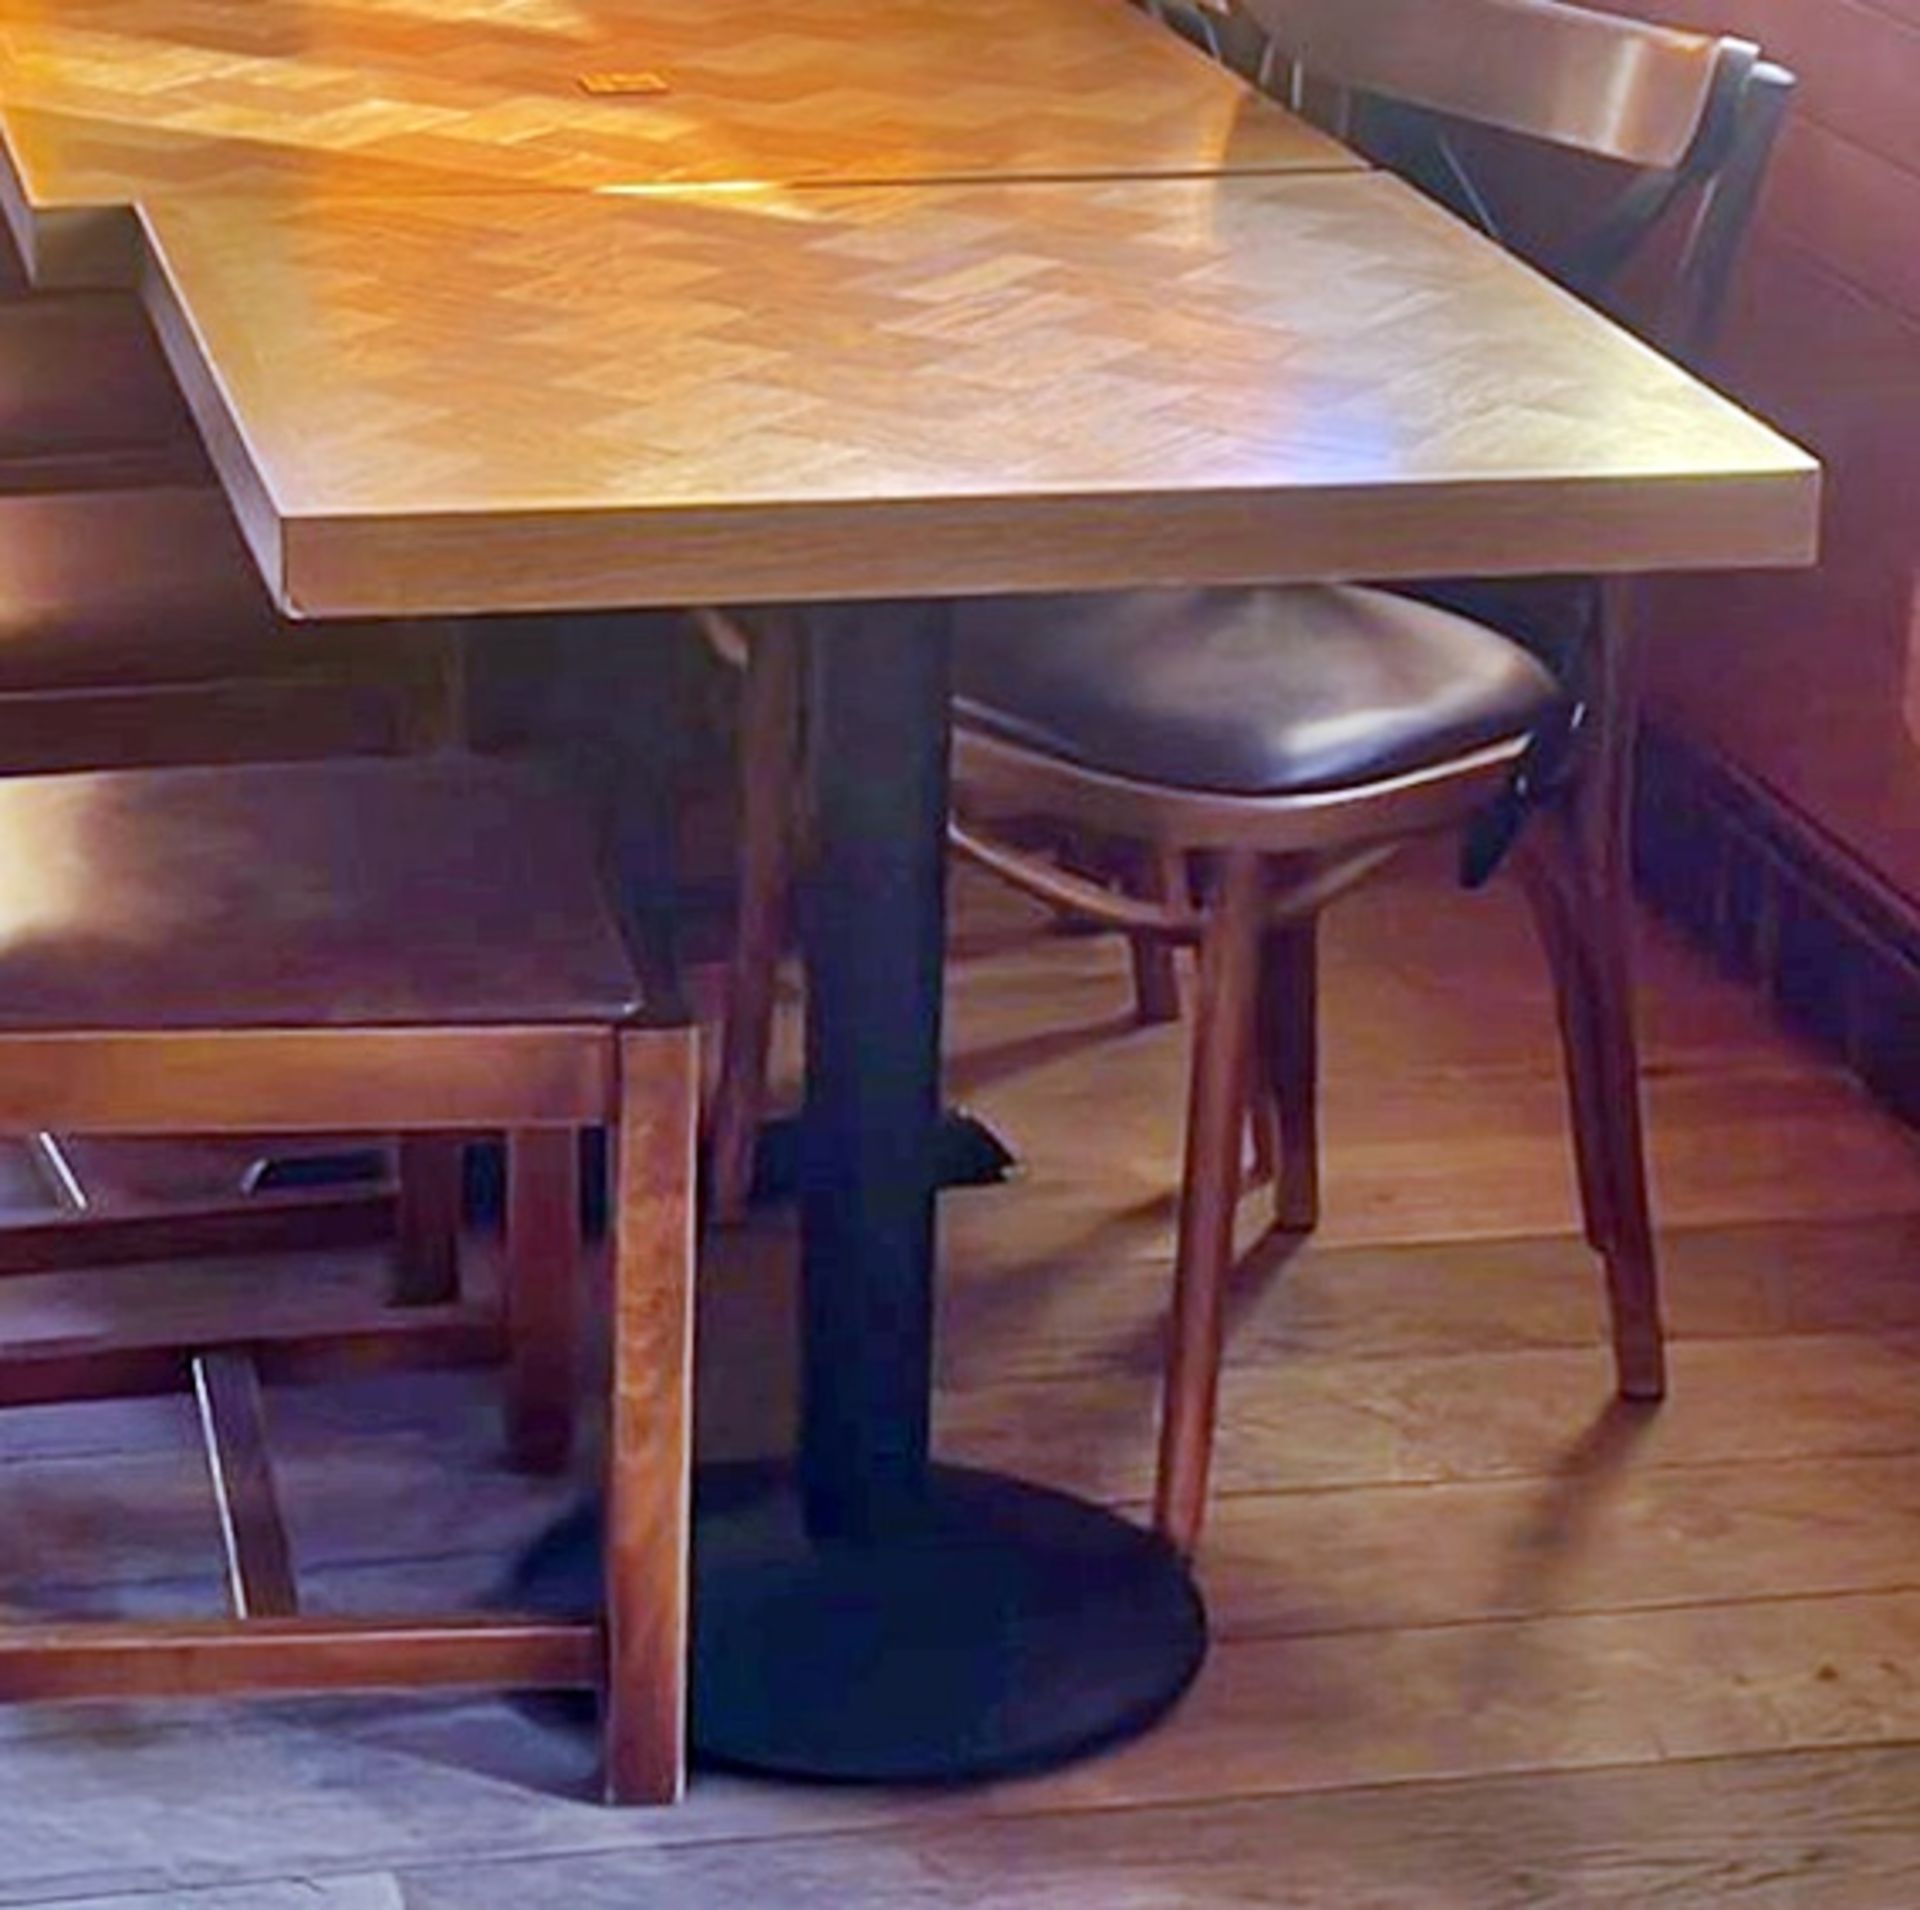 2 x Two Seater Restaurant Dining Tables With Parquet Style Tops and Cast Iron Bases - Image 6 of 9